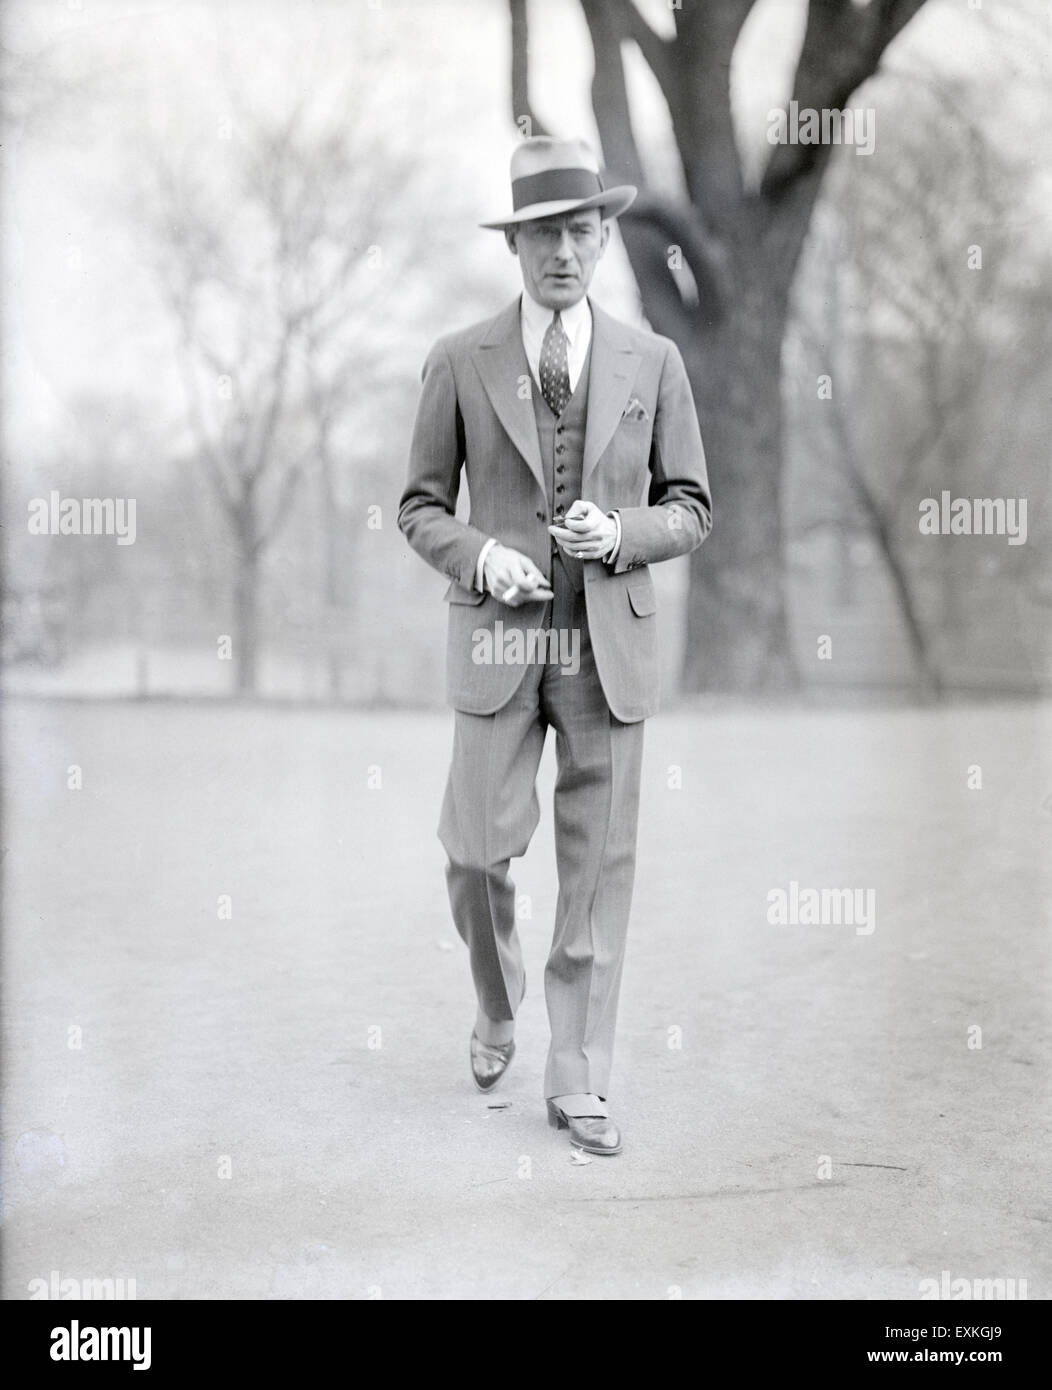 Antique c1930 photograph, Jimmy Walker in Boston, Massachusetts. James John Walker, often known as Jimmy Walker and colloquially as Beau James (1881-1946), was Mayor of New York City from 1926 to 1932. A flamboyant politician, he was a liberal Democrat and part of the powerful Tammany Hall machine. During a corruption scandal he was forced to resign. Stock Photo